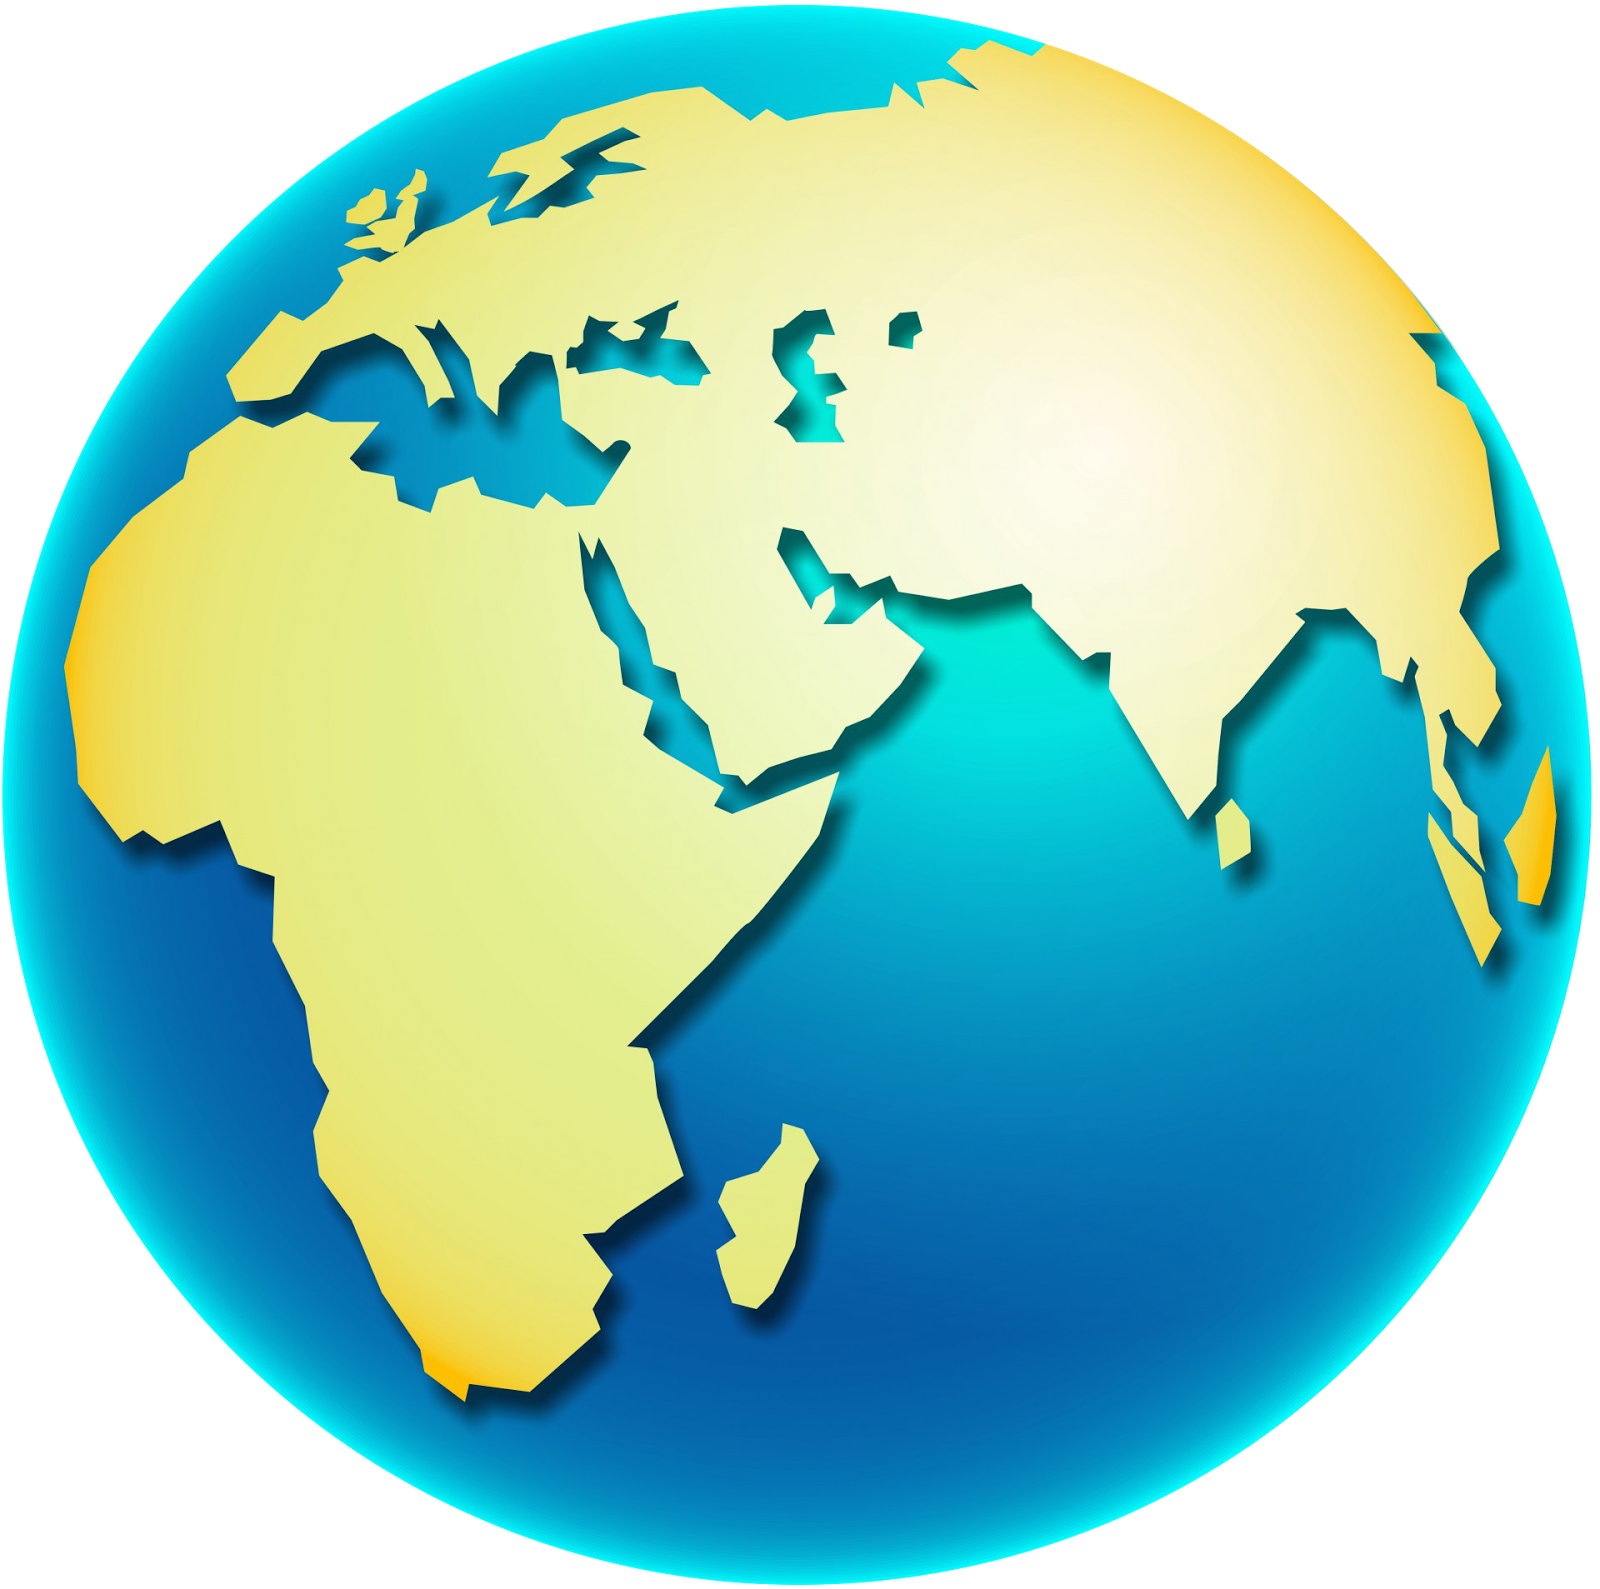 Globe Earth World Map Clip Art Globe Clipart Png Download 16001589